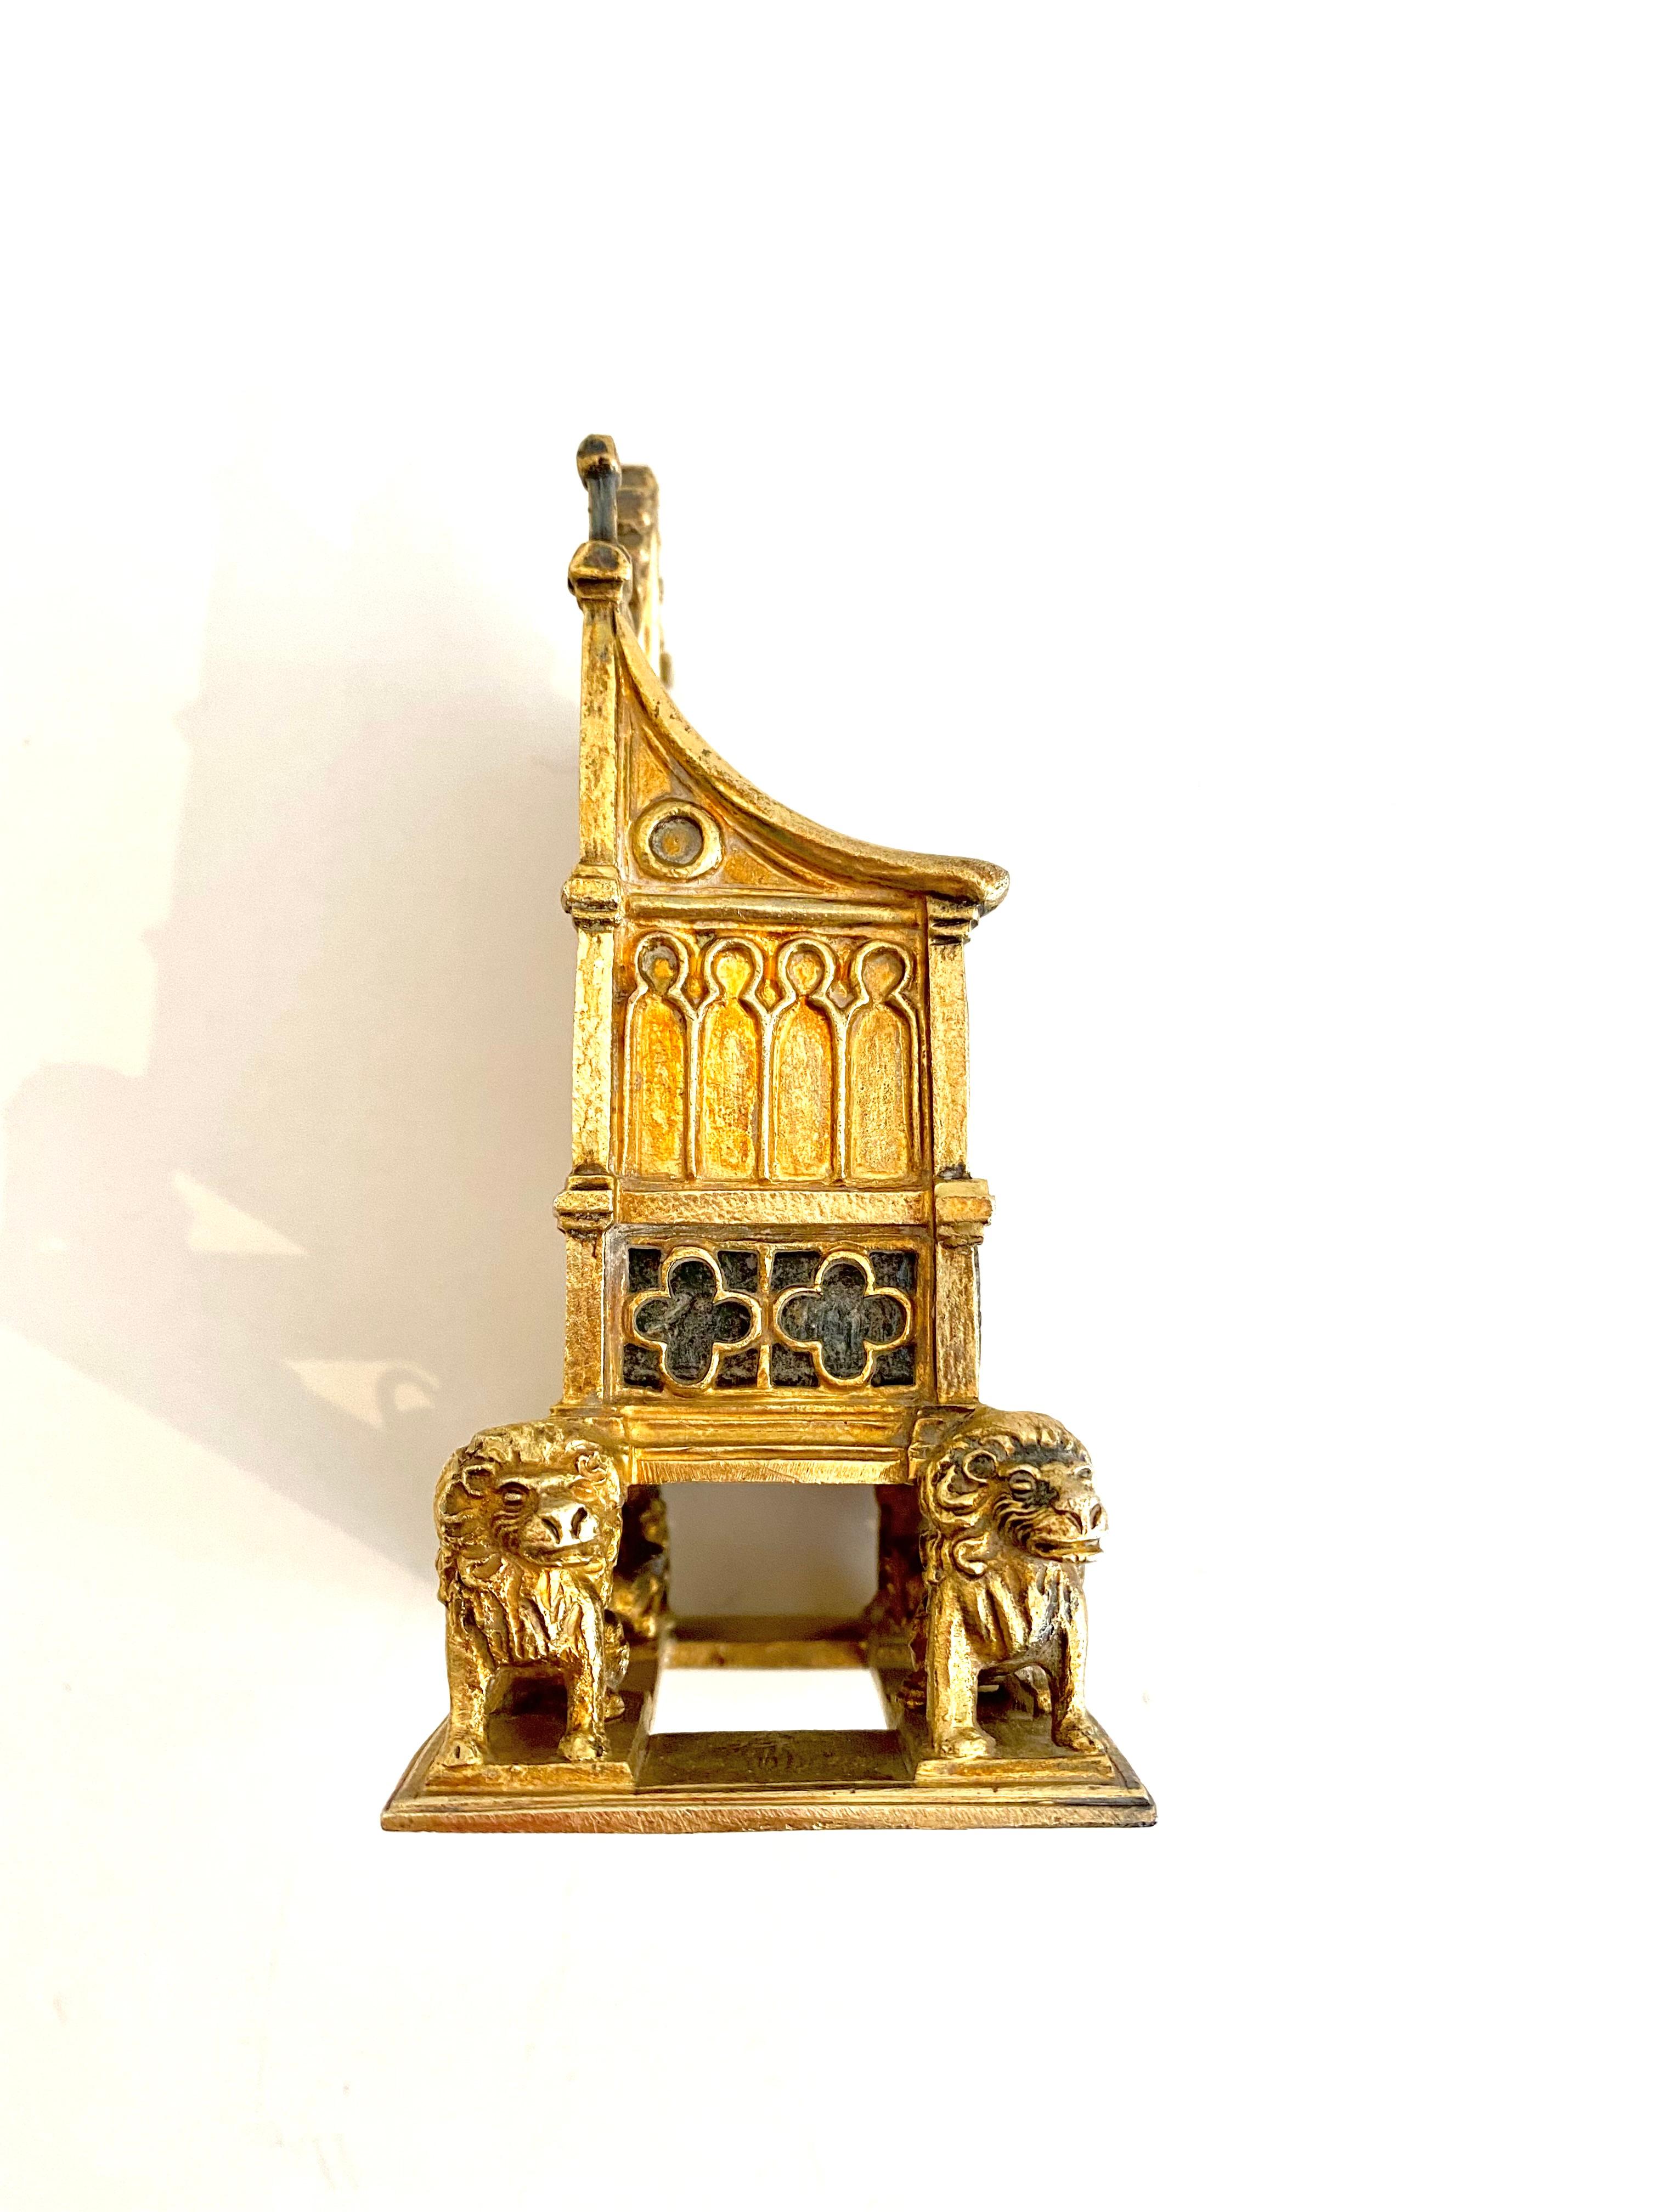 Sterling Silver Gilt Coronation Throne - Other Art Style Sculpture by Adie Bros